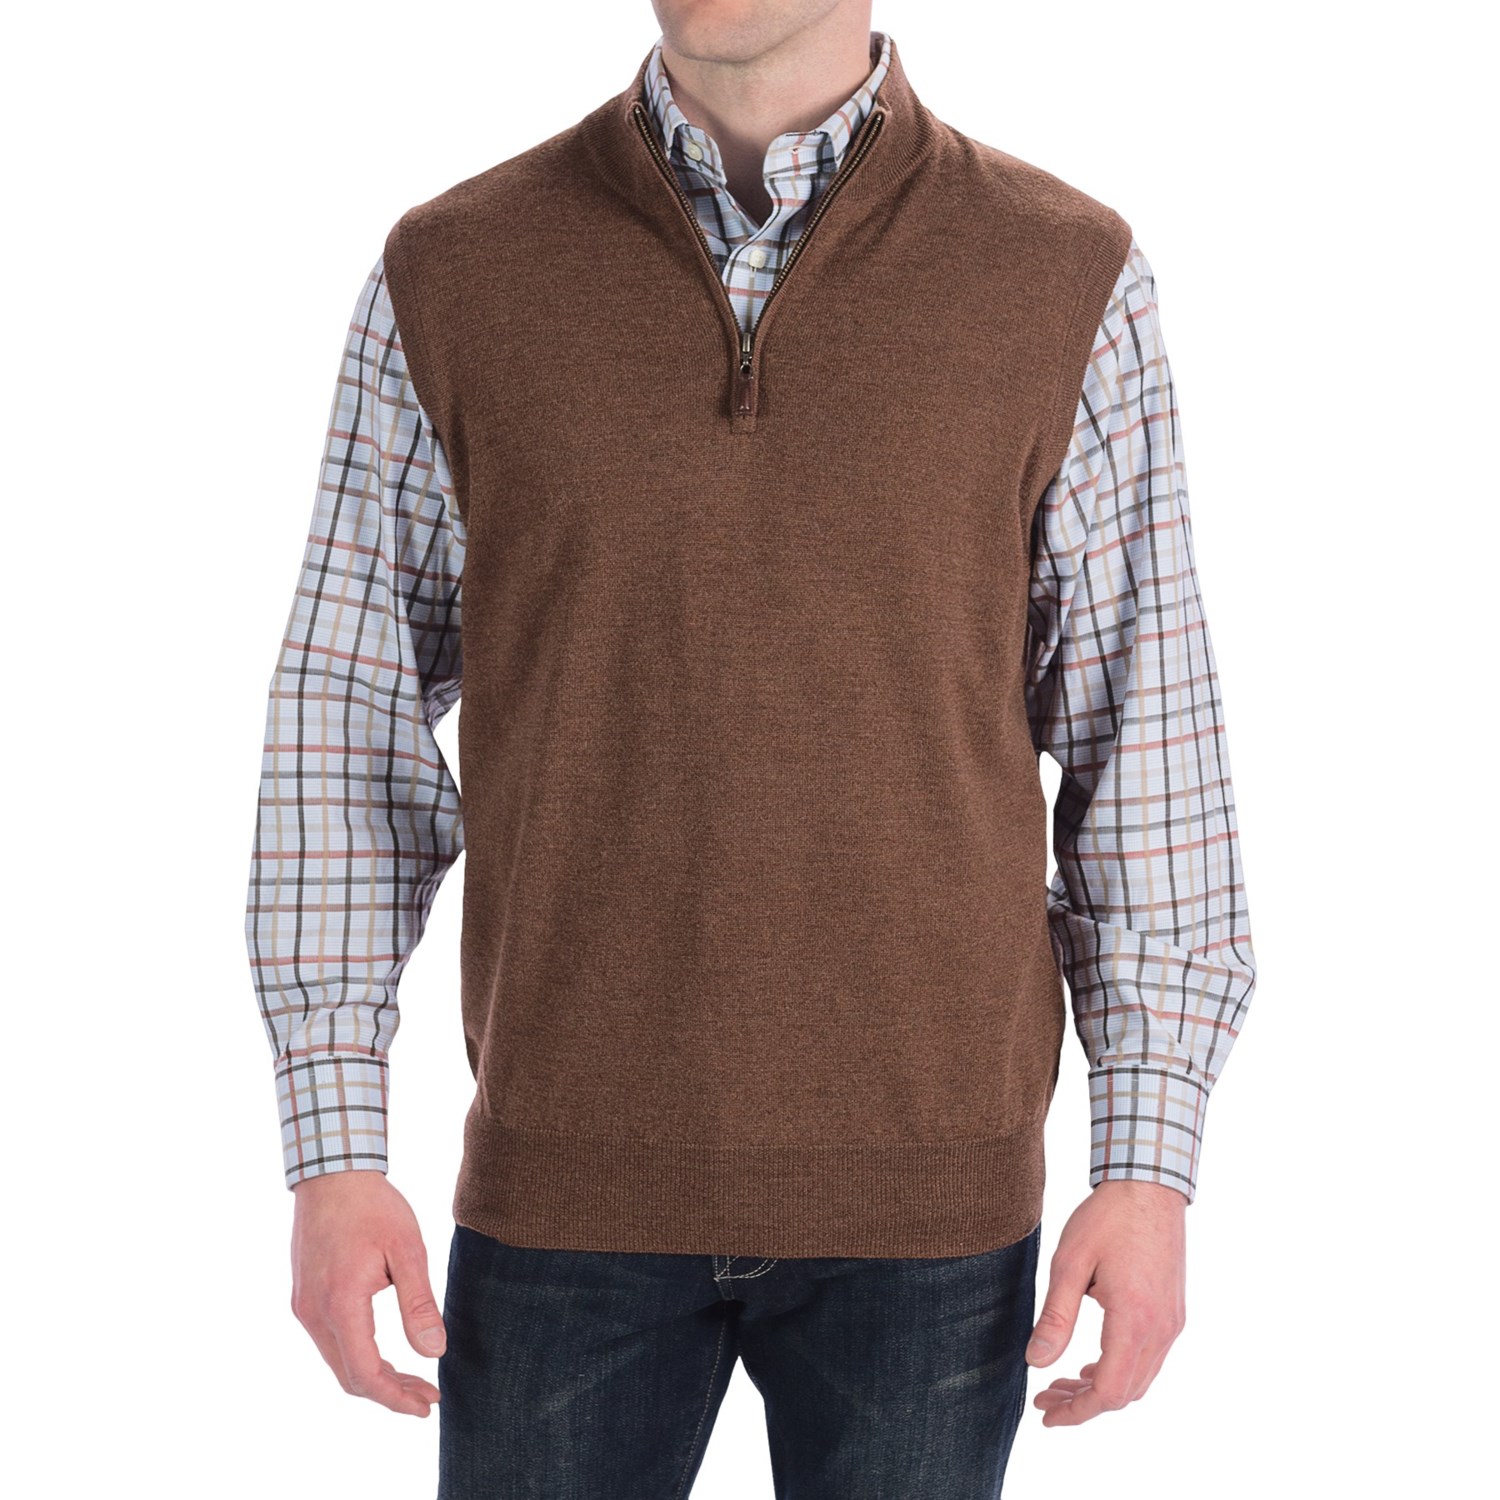 Men'S Zippered Sweater Vest - Cardigan With Buttons